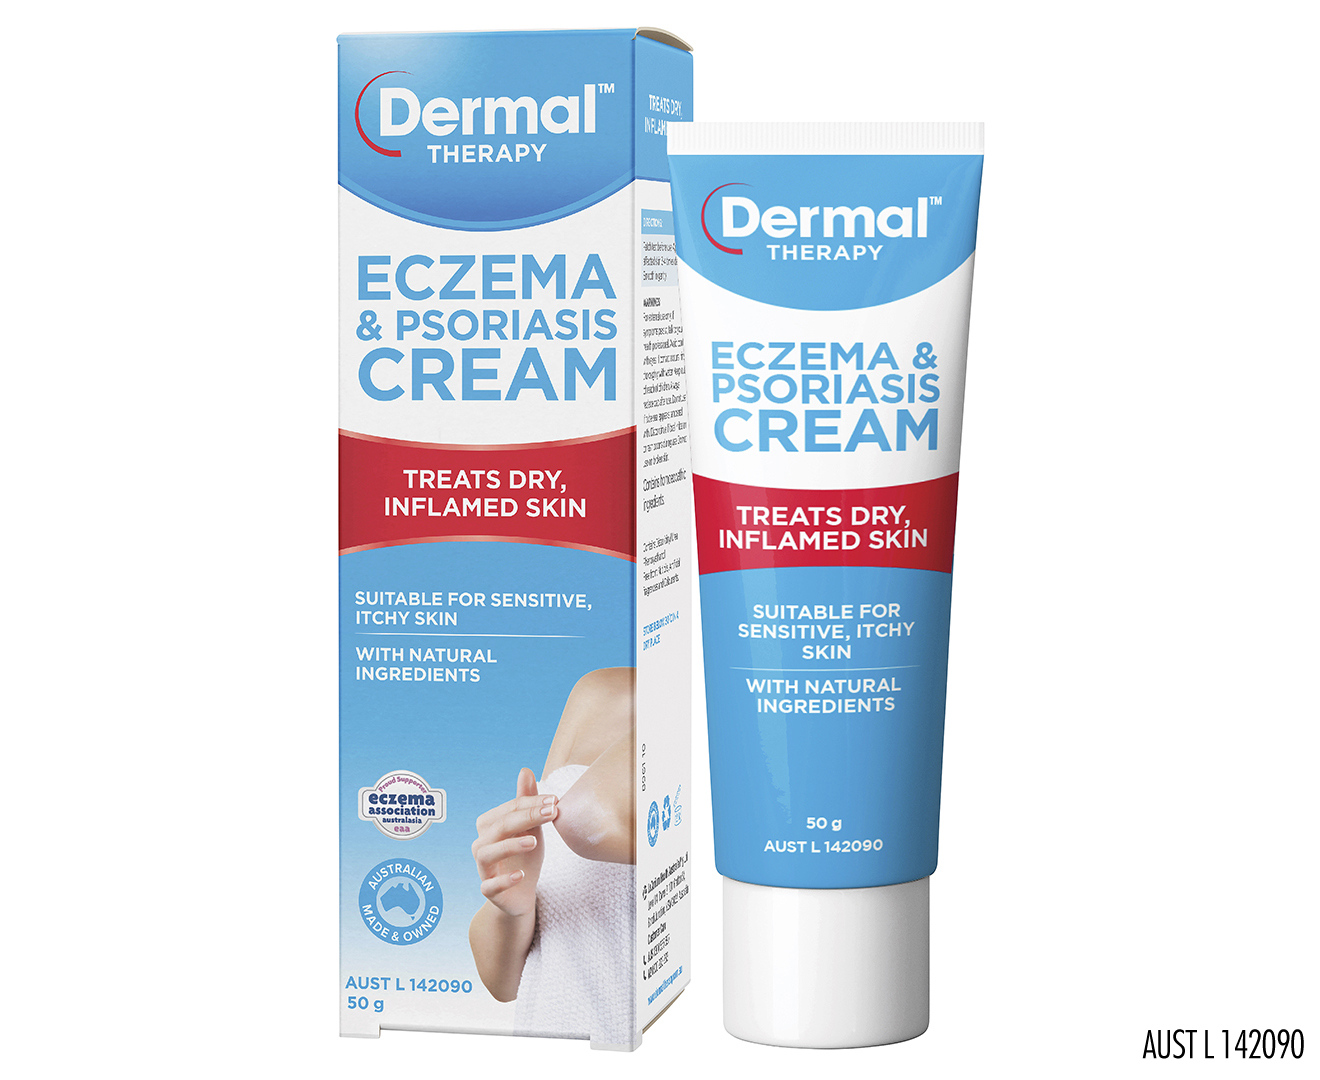 deep therapy cream for eczema